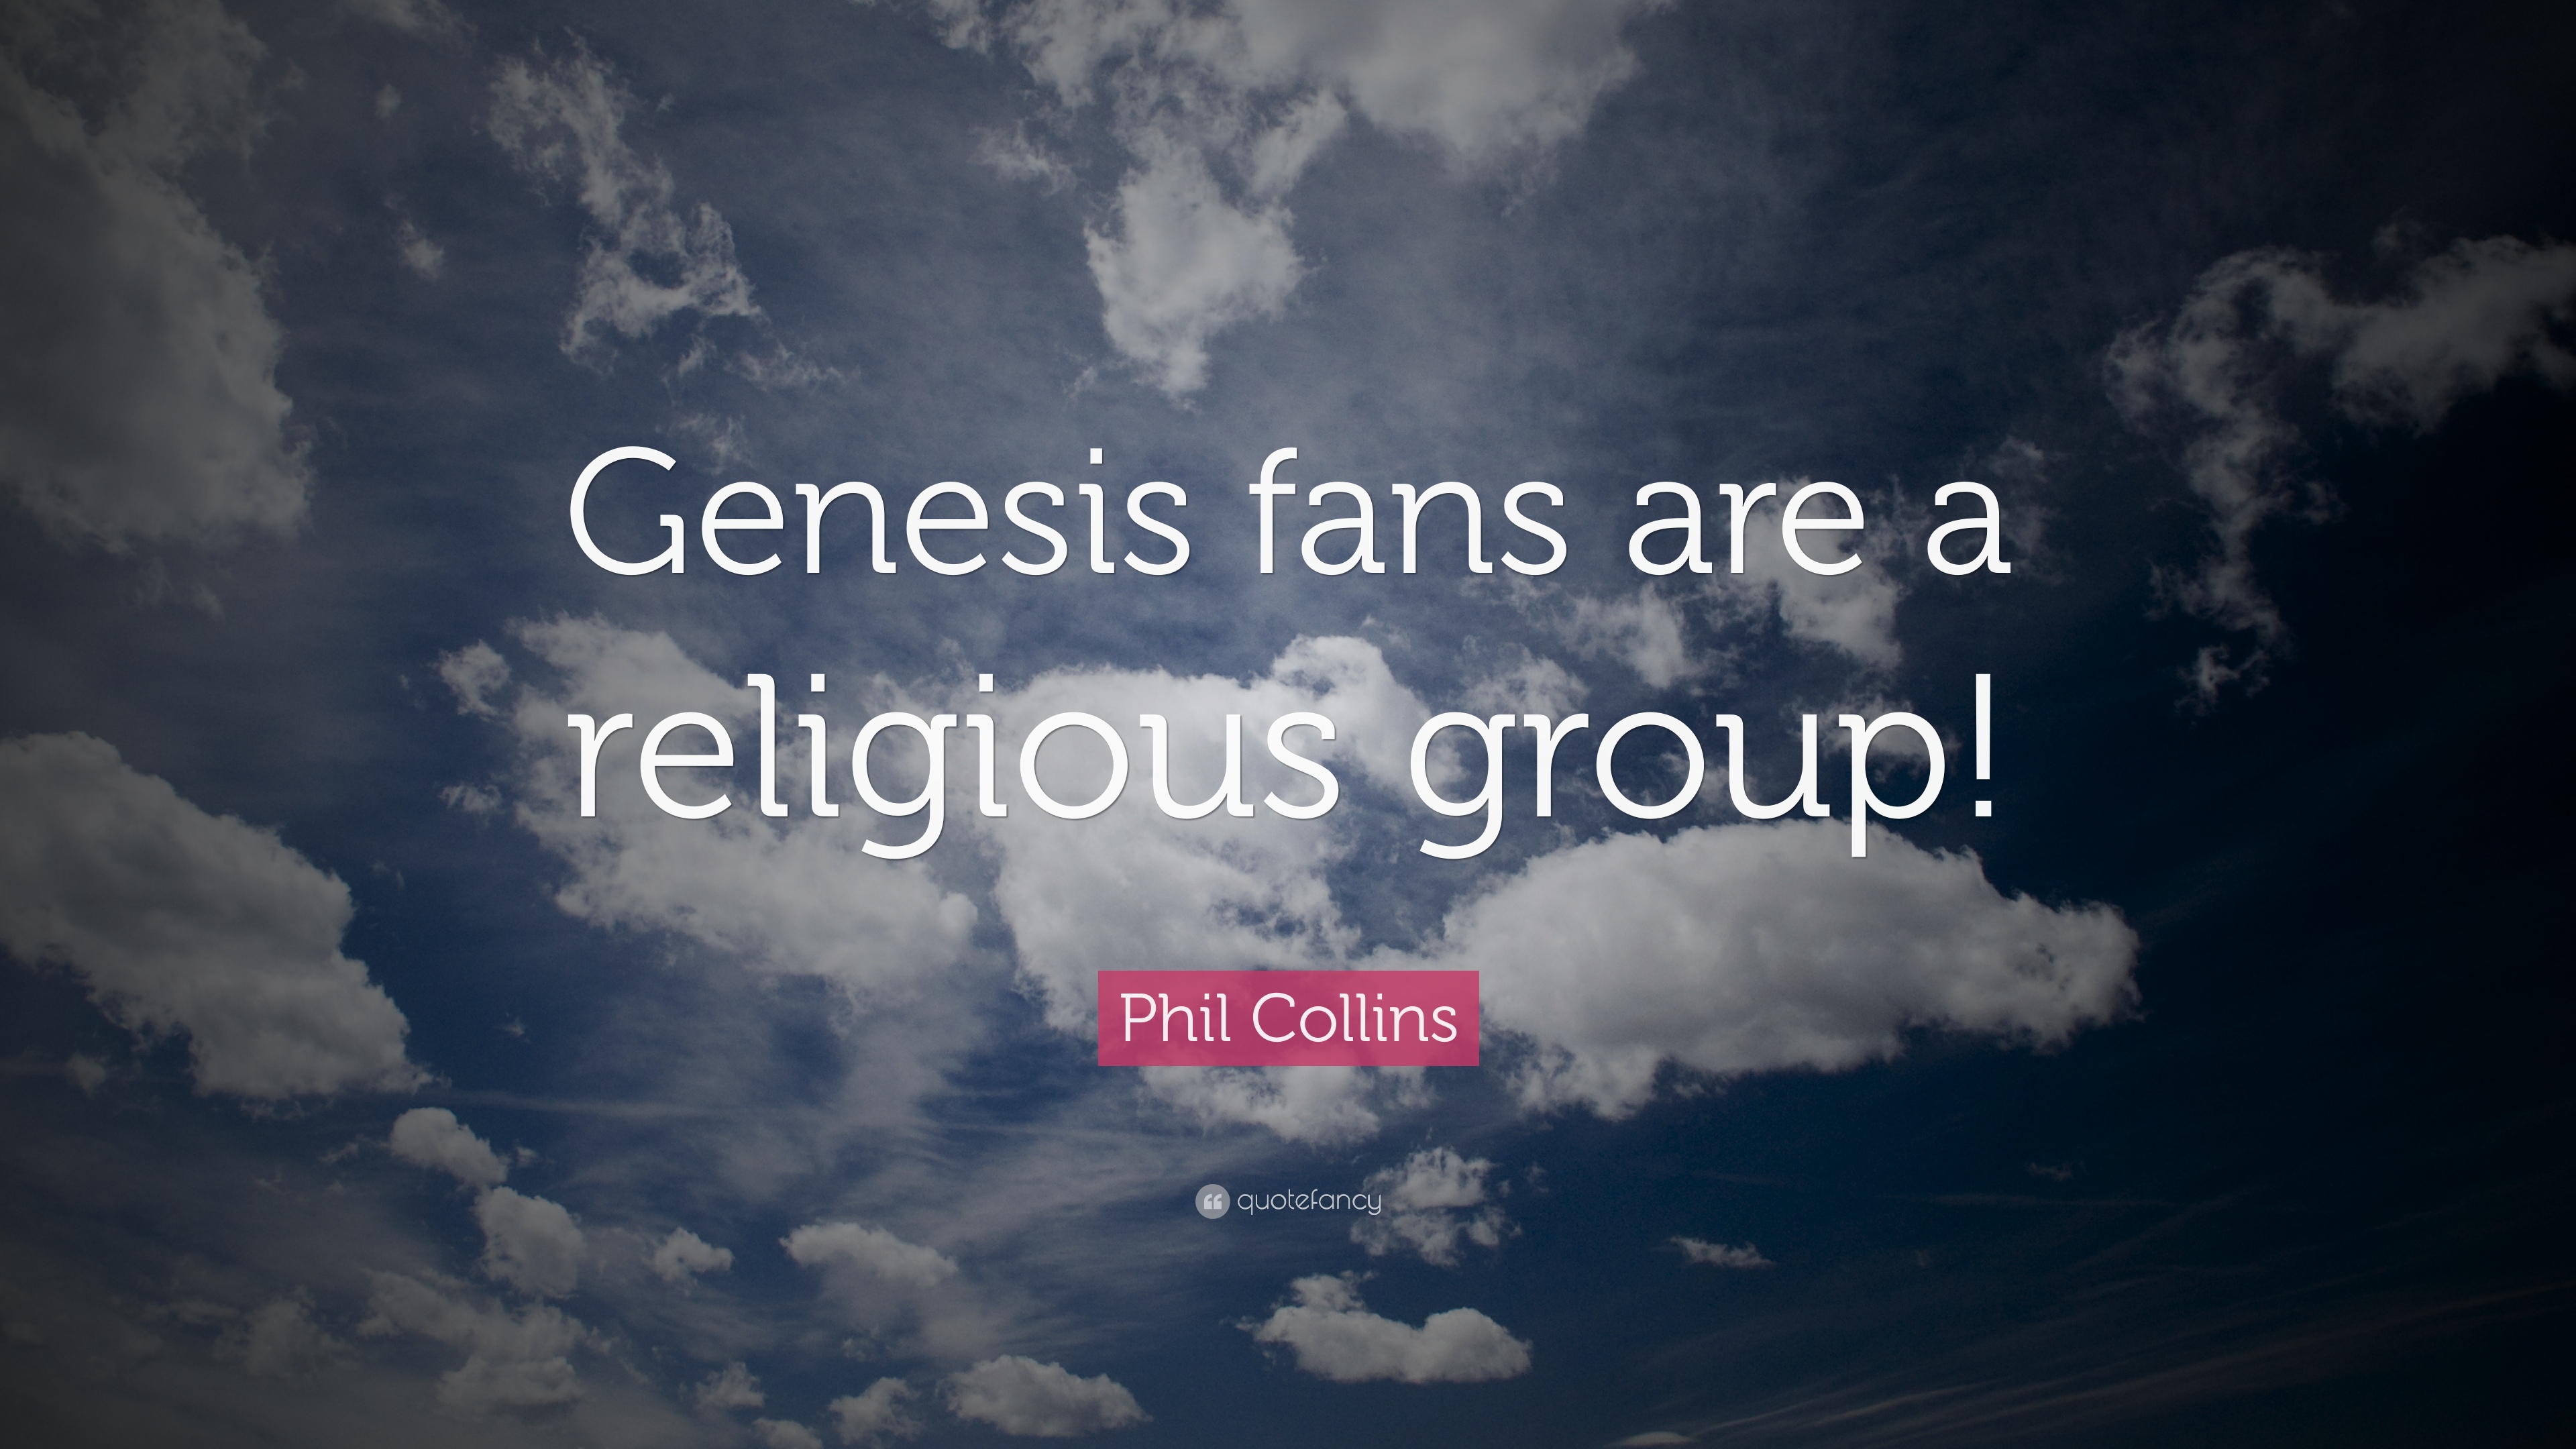 Phil Collins Quote: “Genesis fans are a religious group!” 7